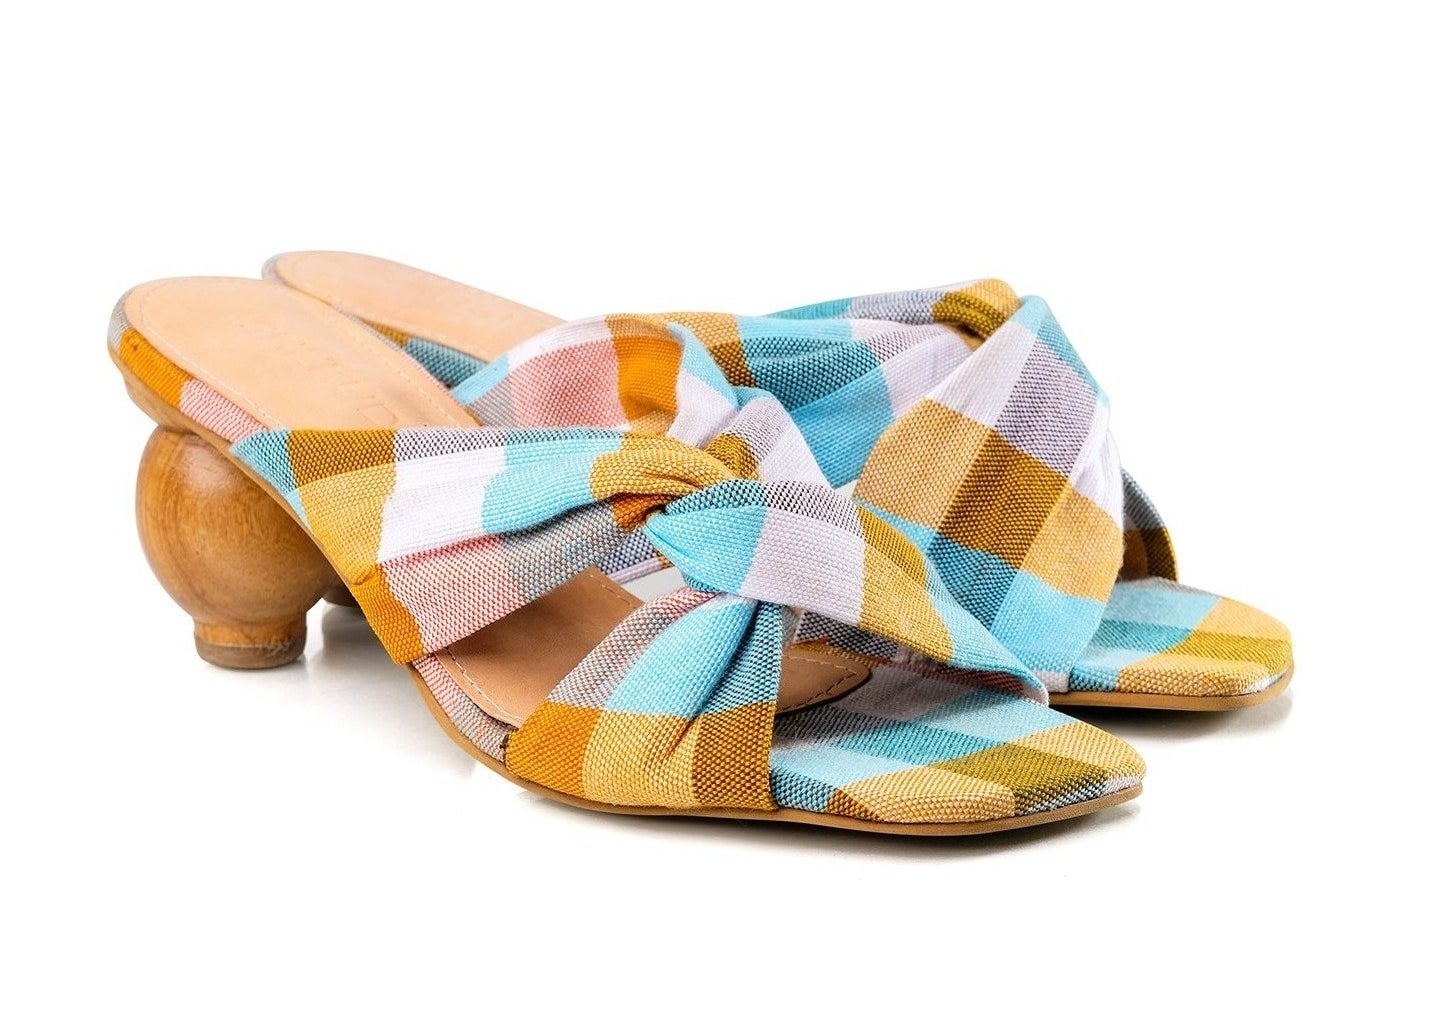 the mules with circular heel and yellow, blue, and white plaid cross-top mules